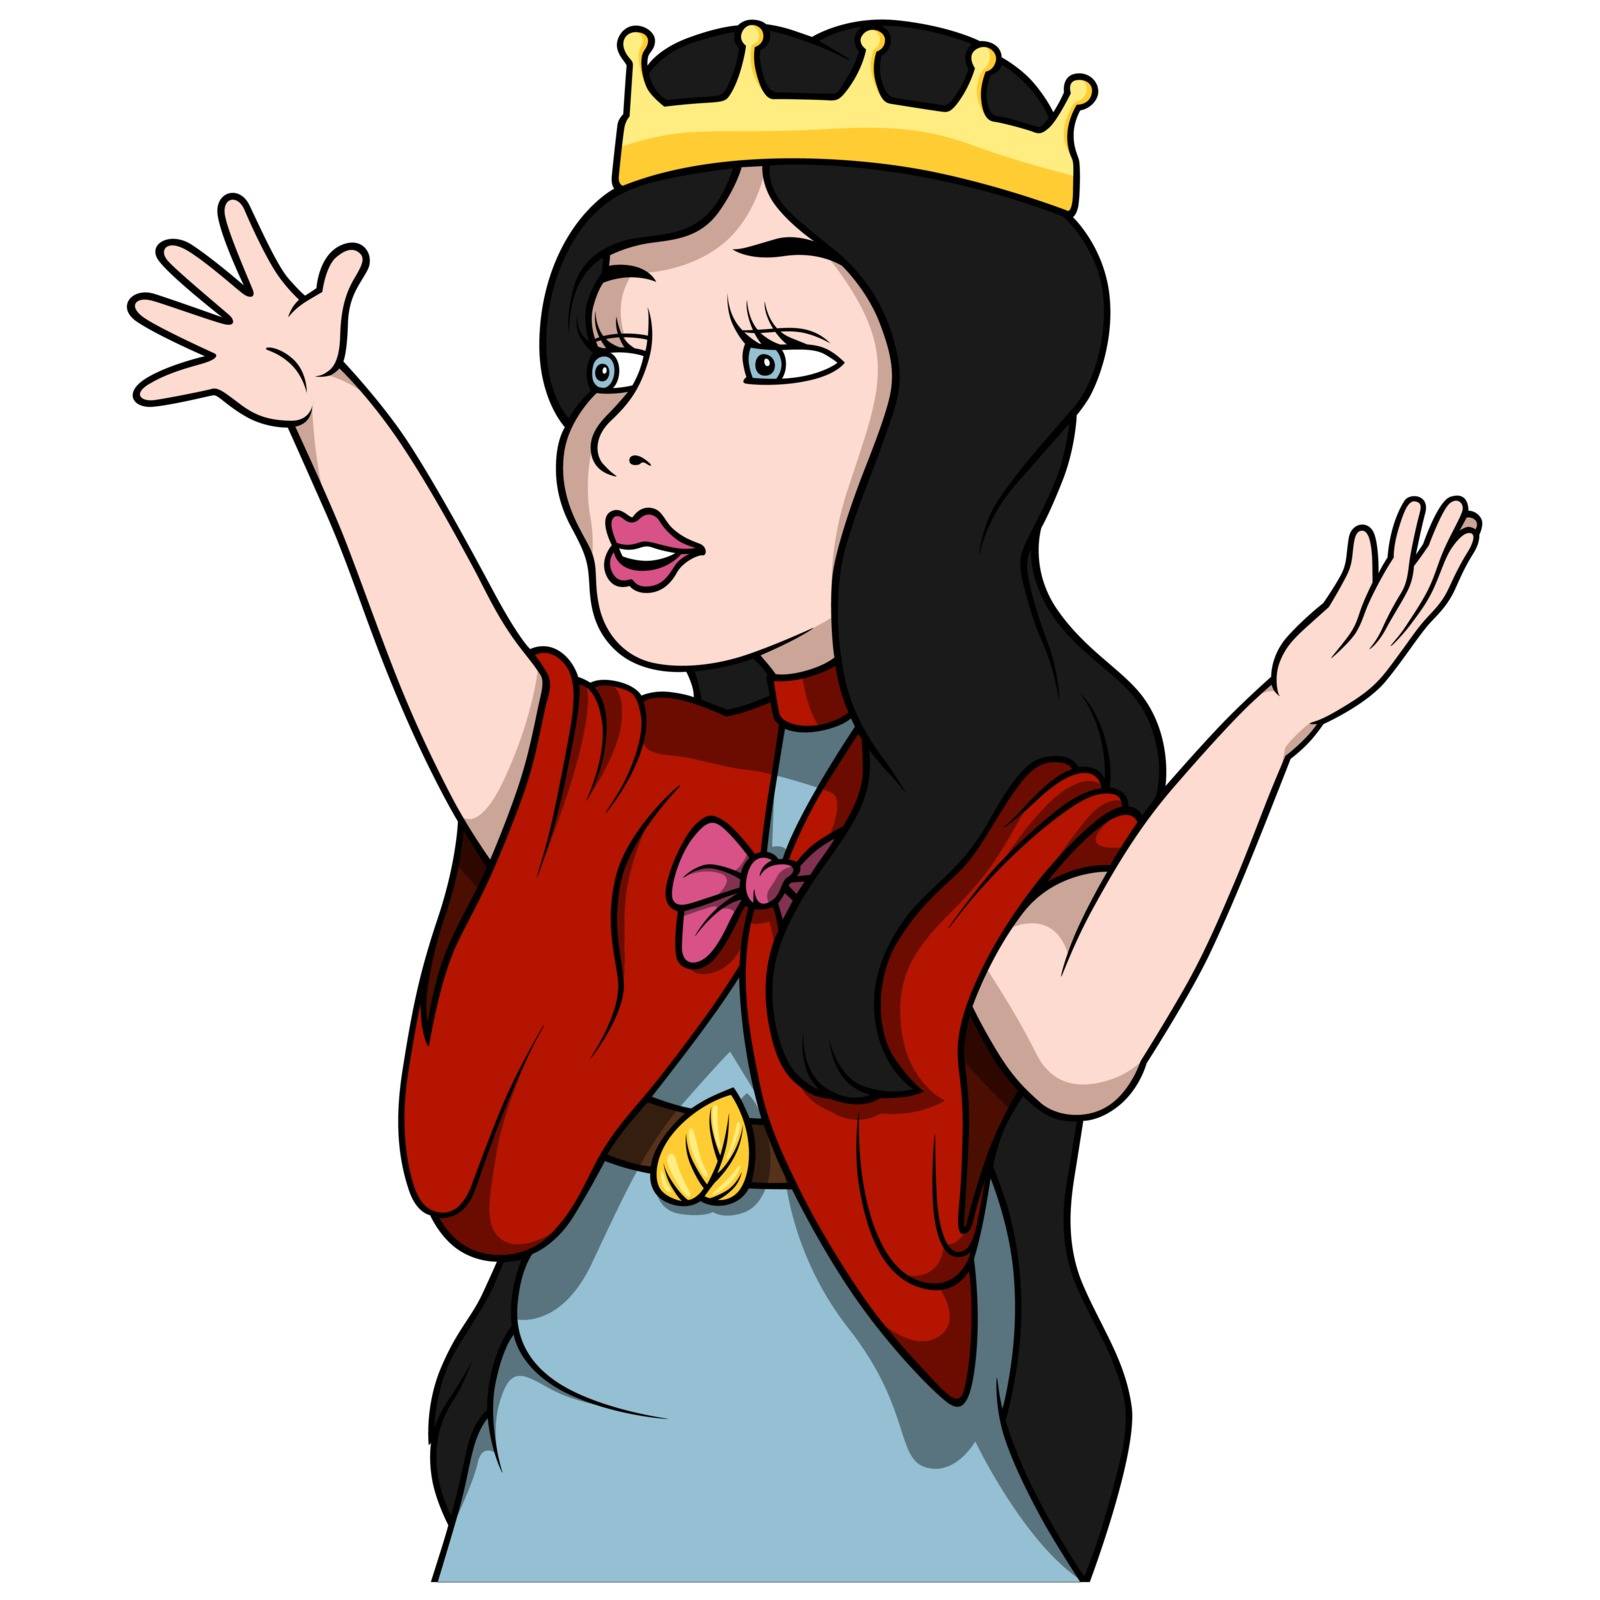 Queen with Hands Up - Colored Cartoon Illustration, Vector